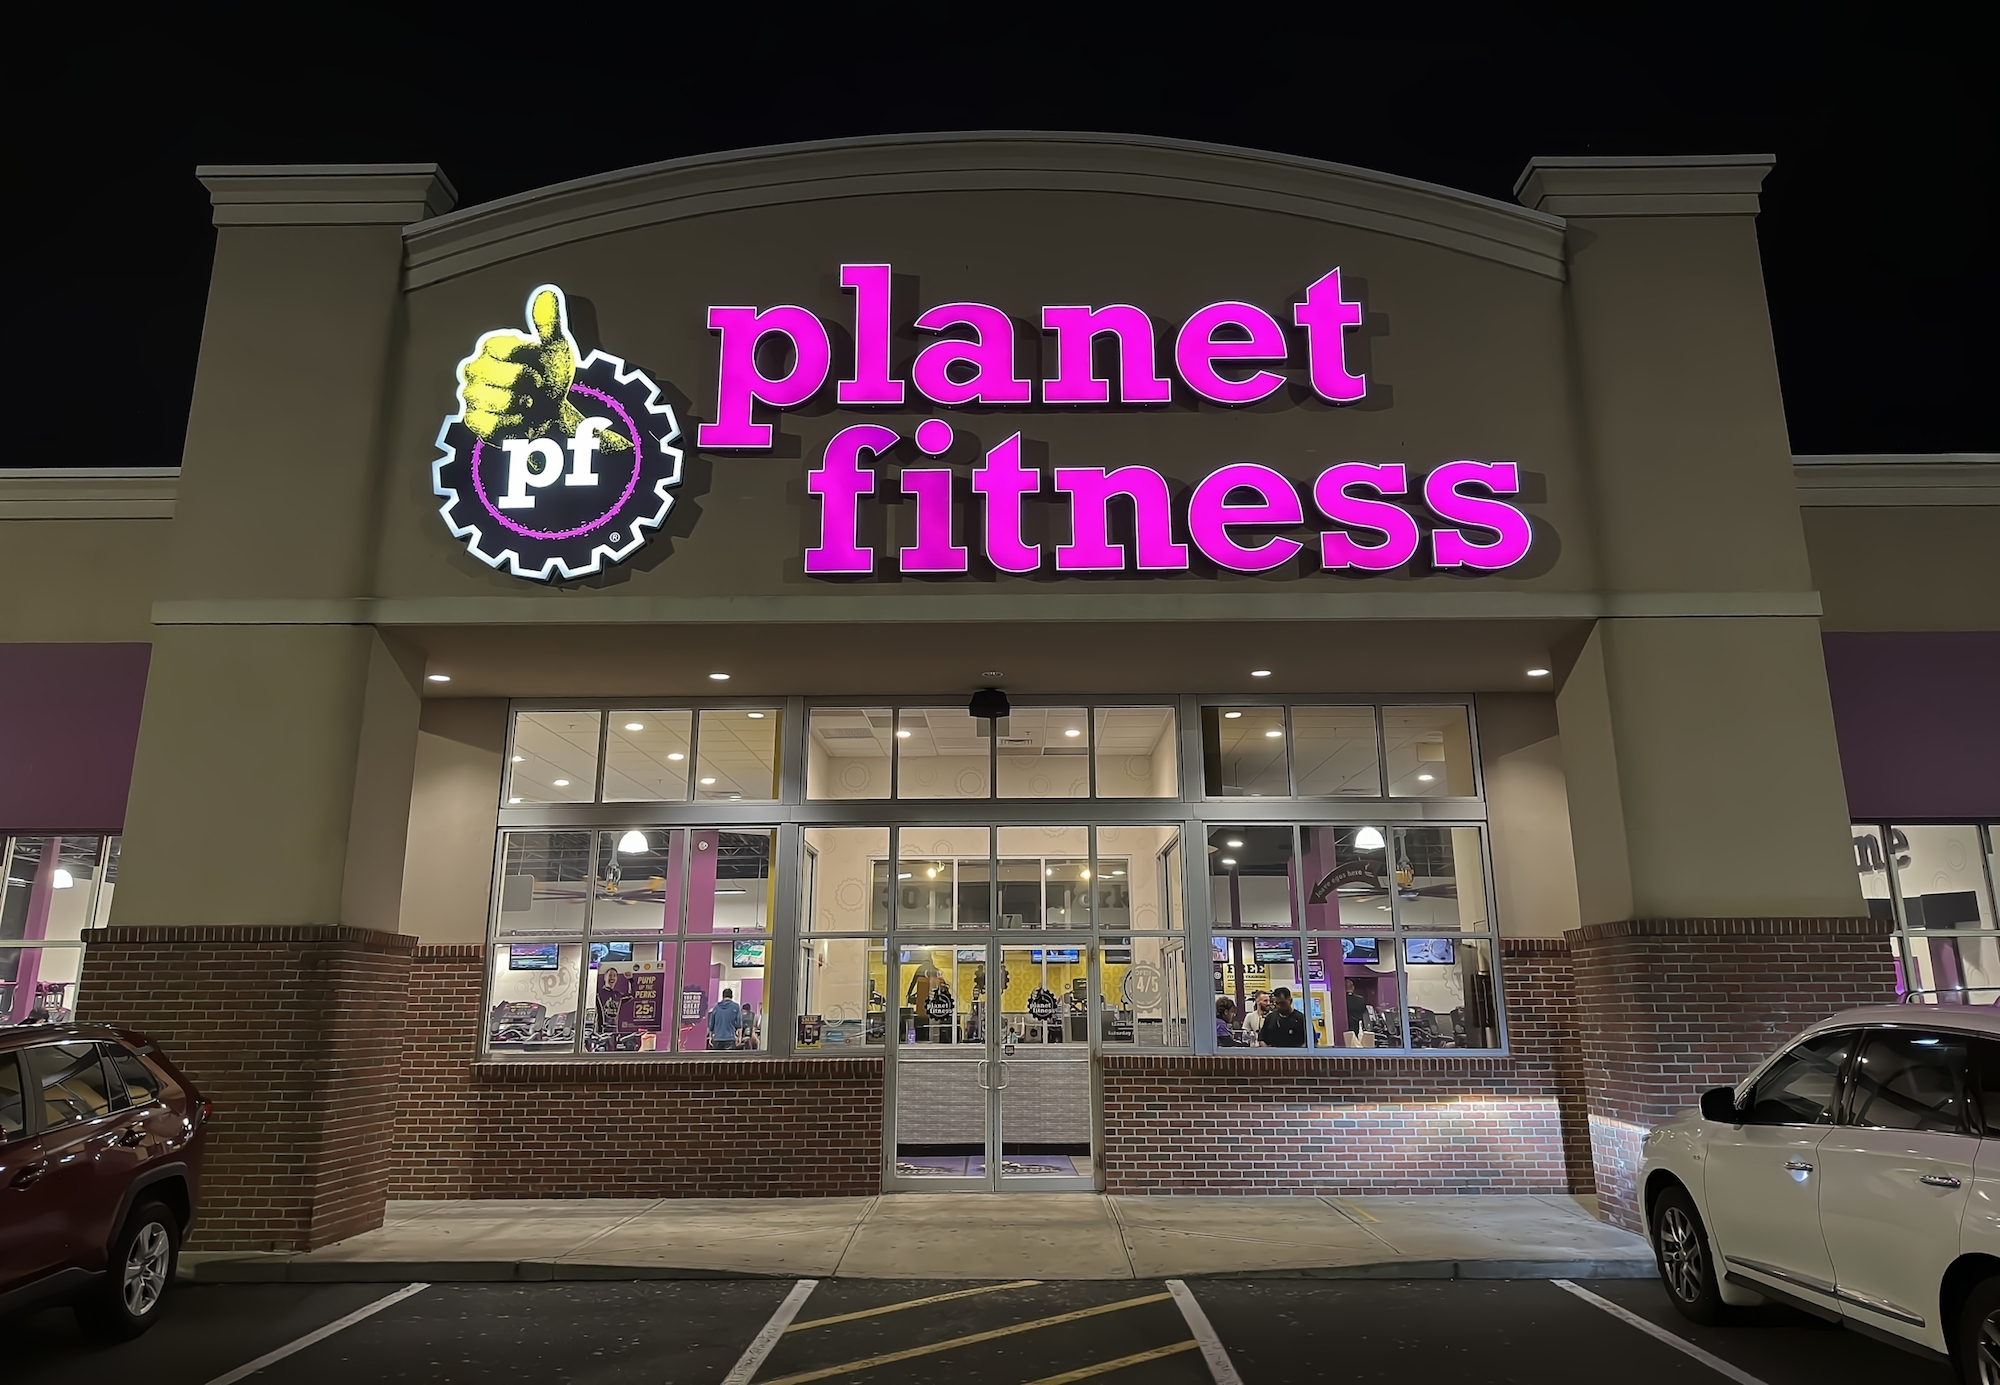 Planet Fitness Nears 20 Million Members Amid Strong Growth